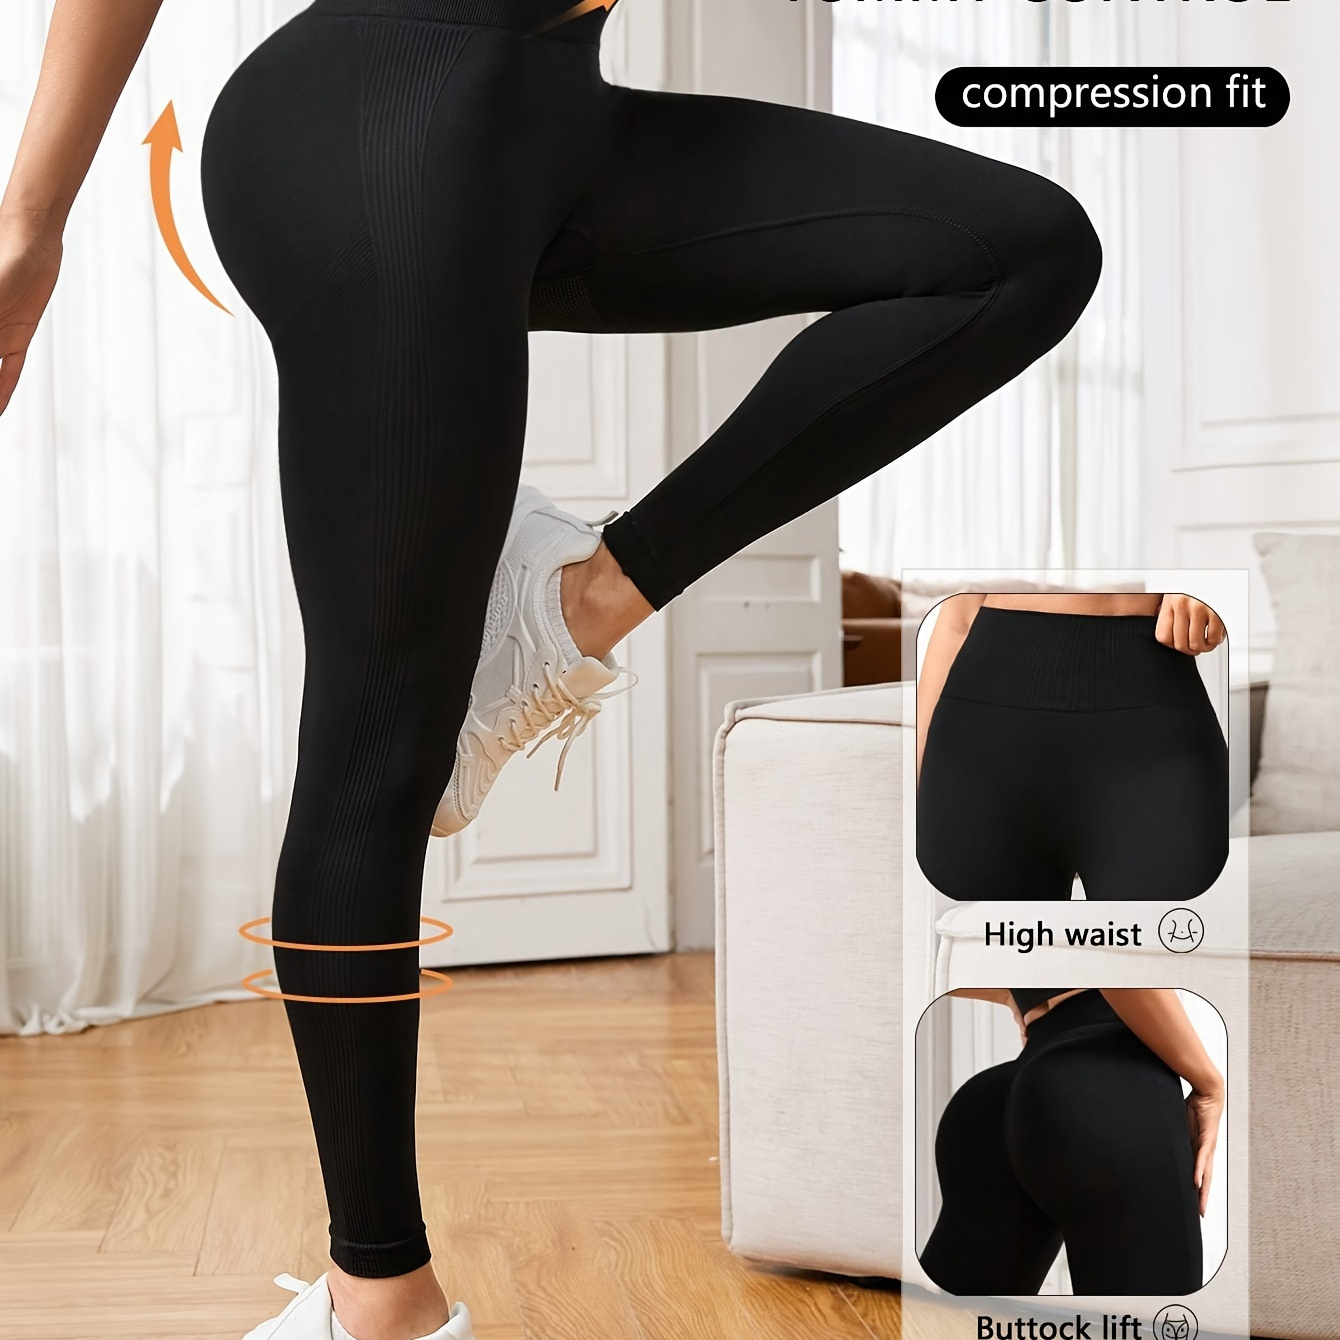 

Women's Seamless High Waist Athletic Yoga Leggings, Compression Tummy Control, Butt Lift, Stretchy Workout Pants